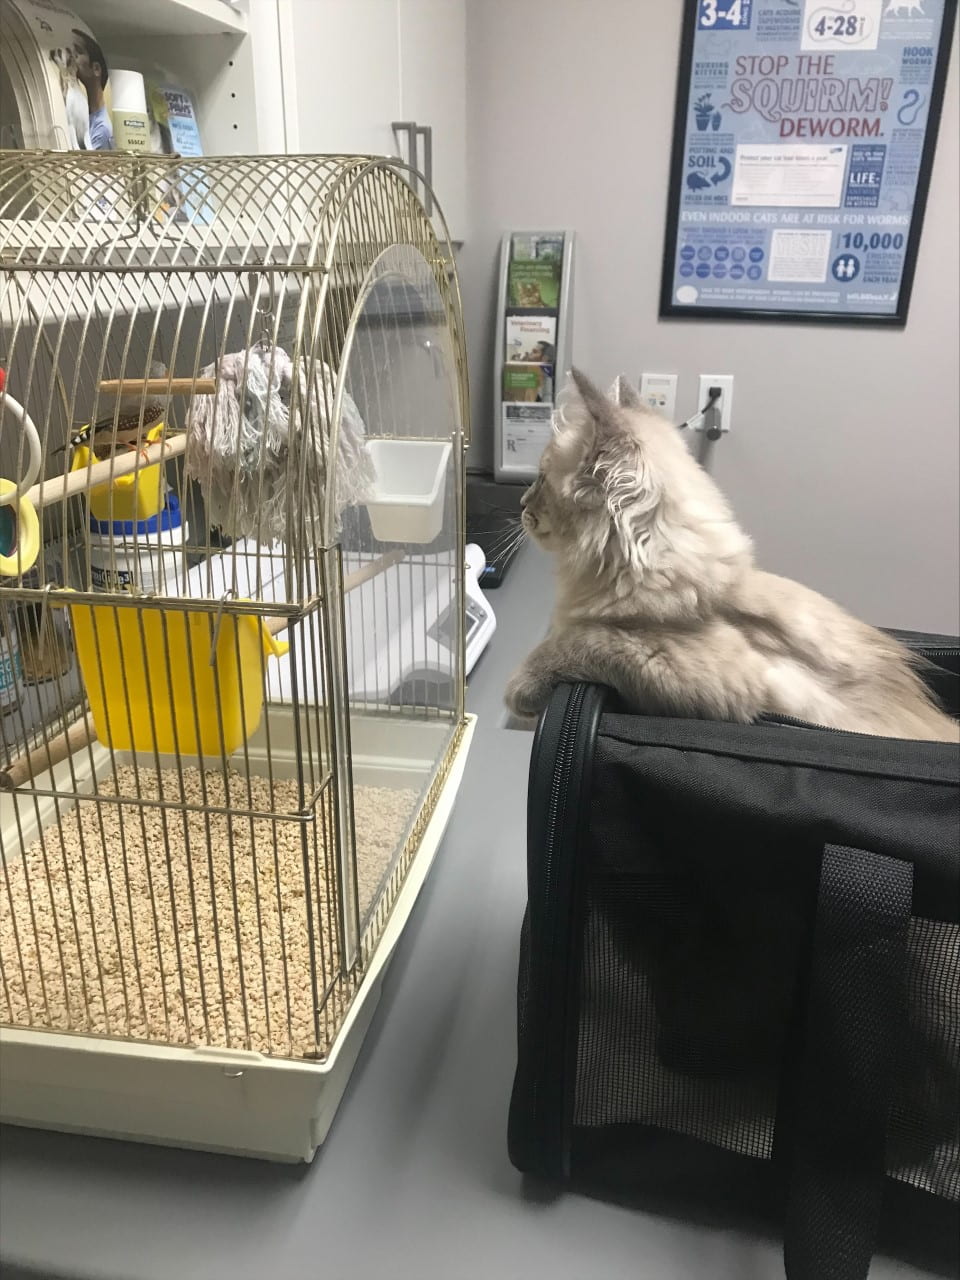 Baby Howie the cat at the vet's office, looking at a bird in a cage.